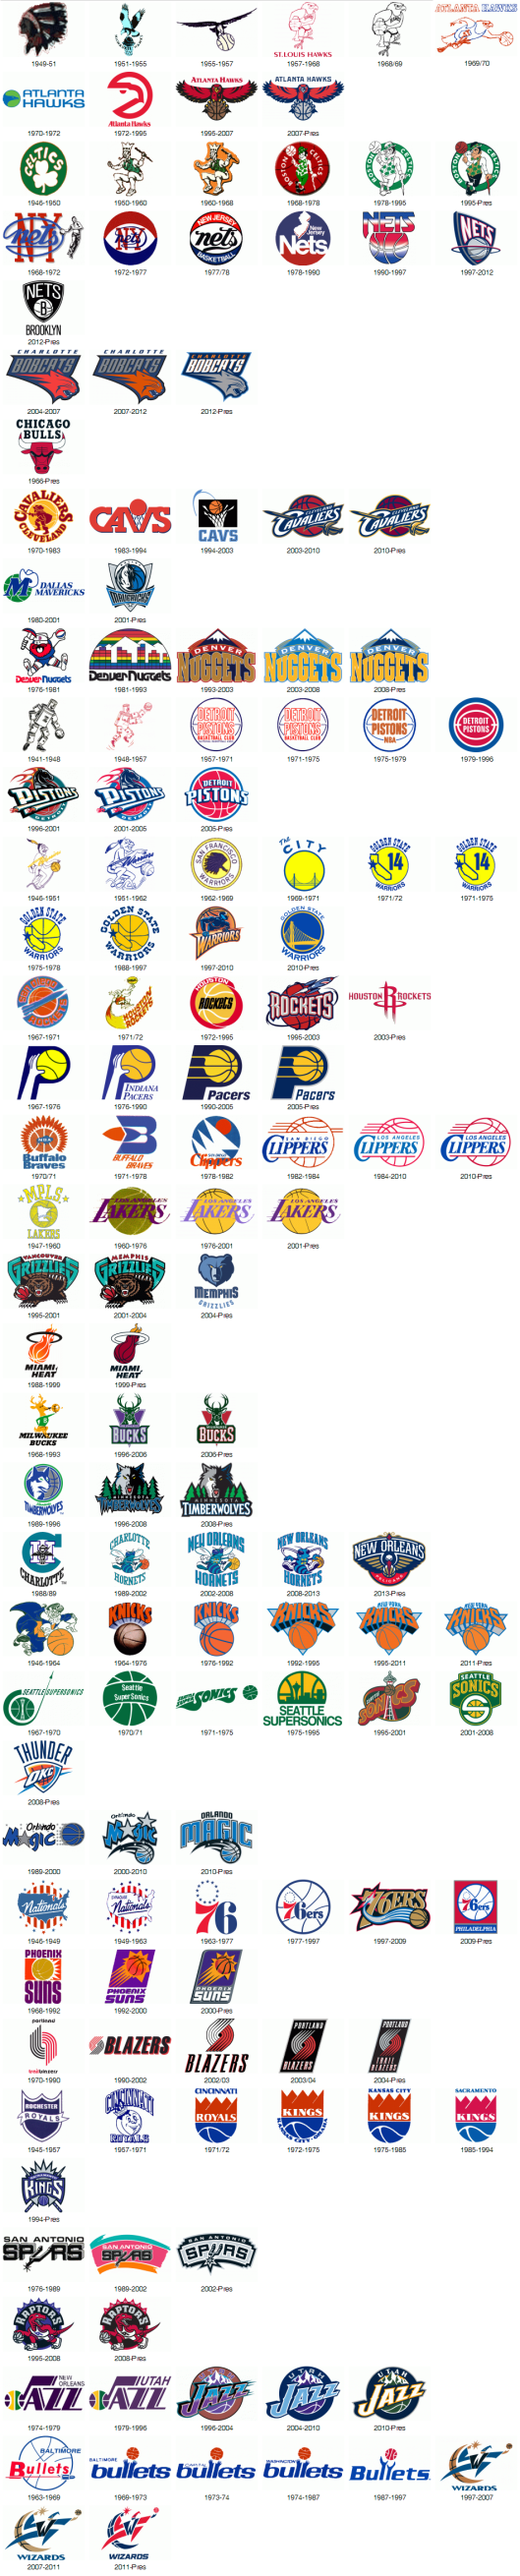 some nba teams new logos   28 images   brand new marvel